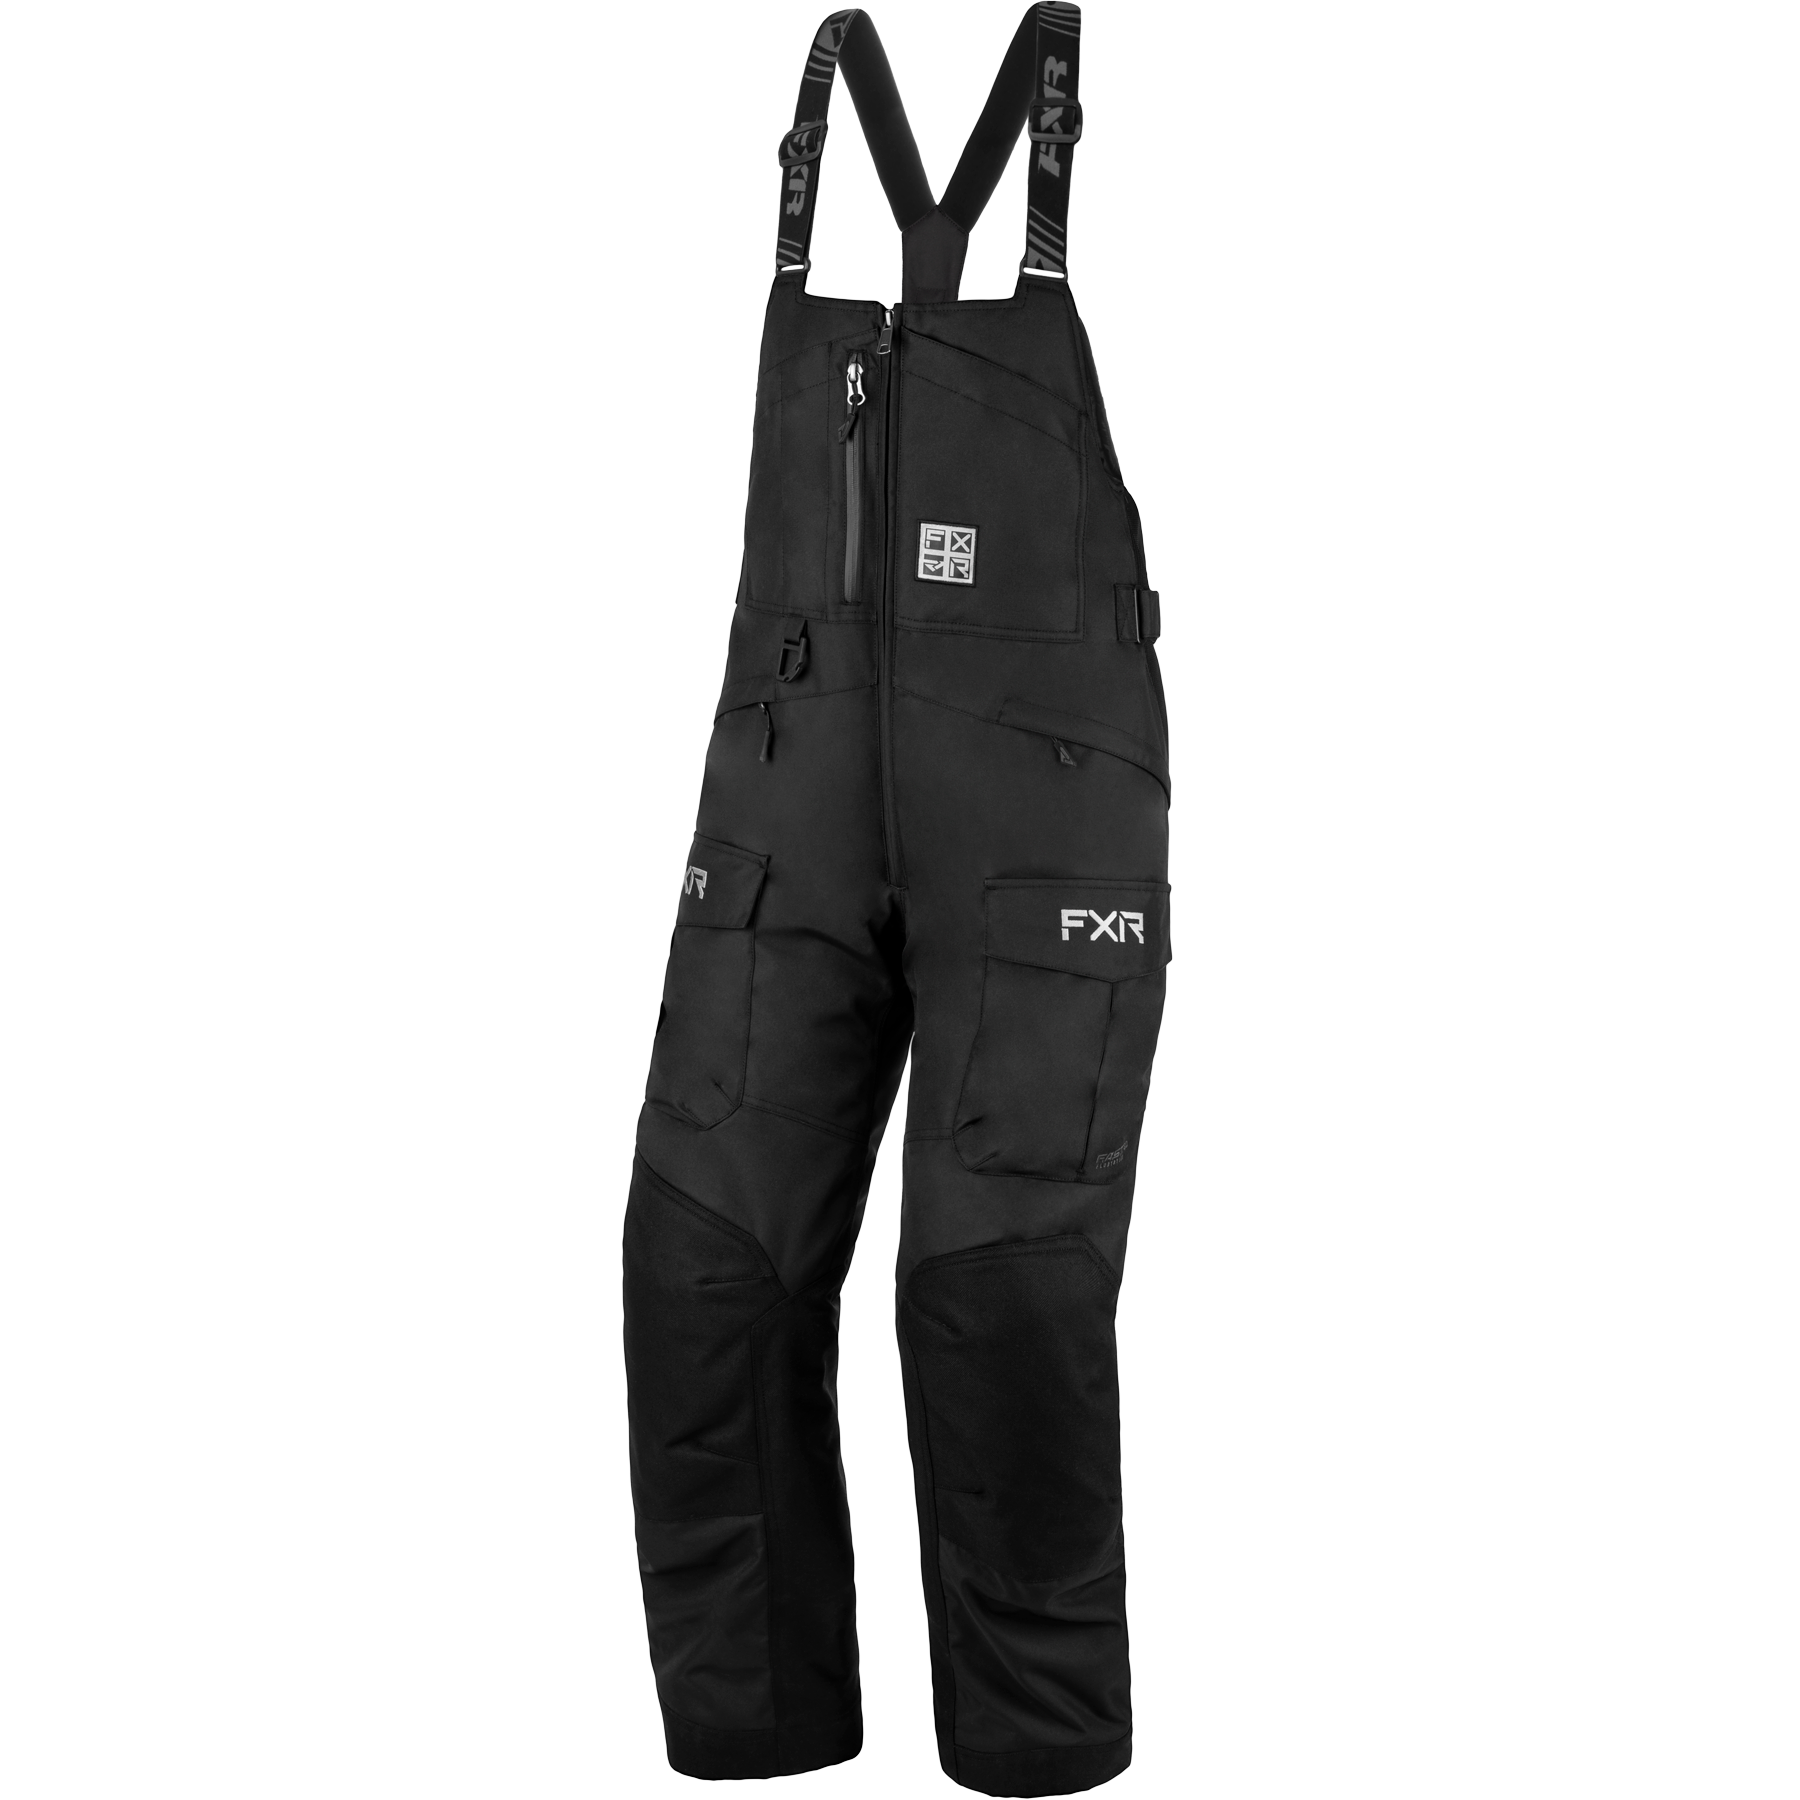 fxr racing insulated pants for womens excursion ice pro fast